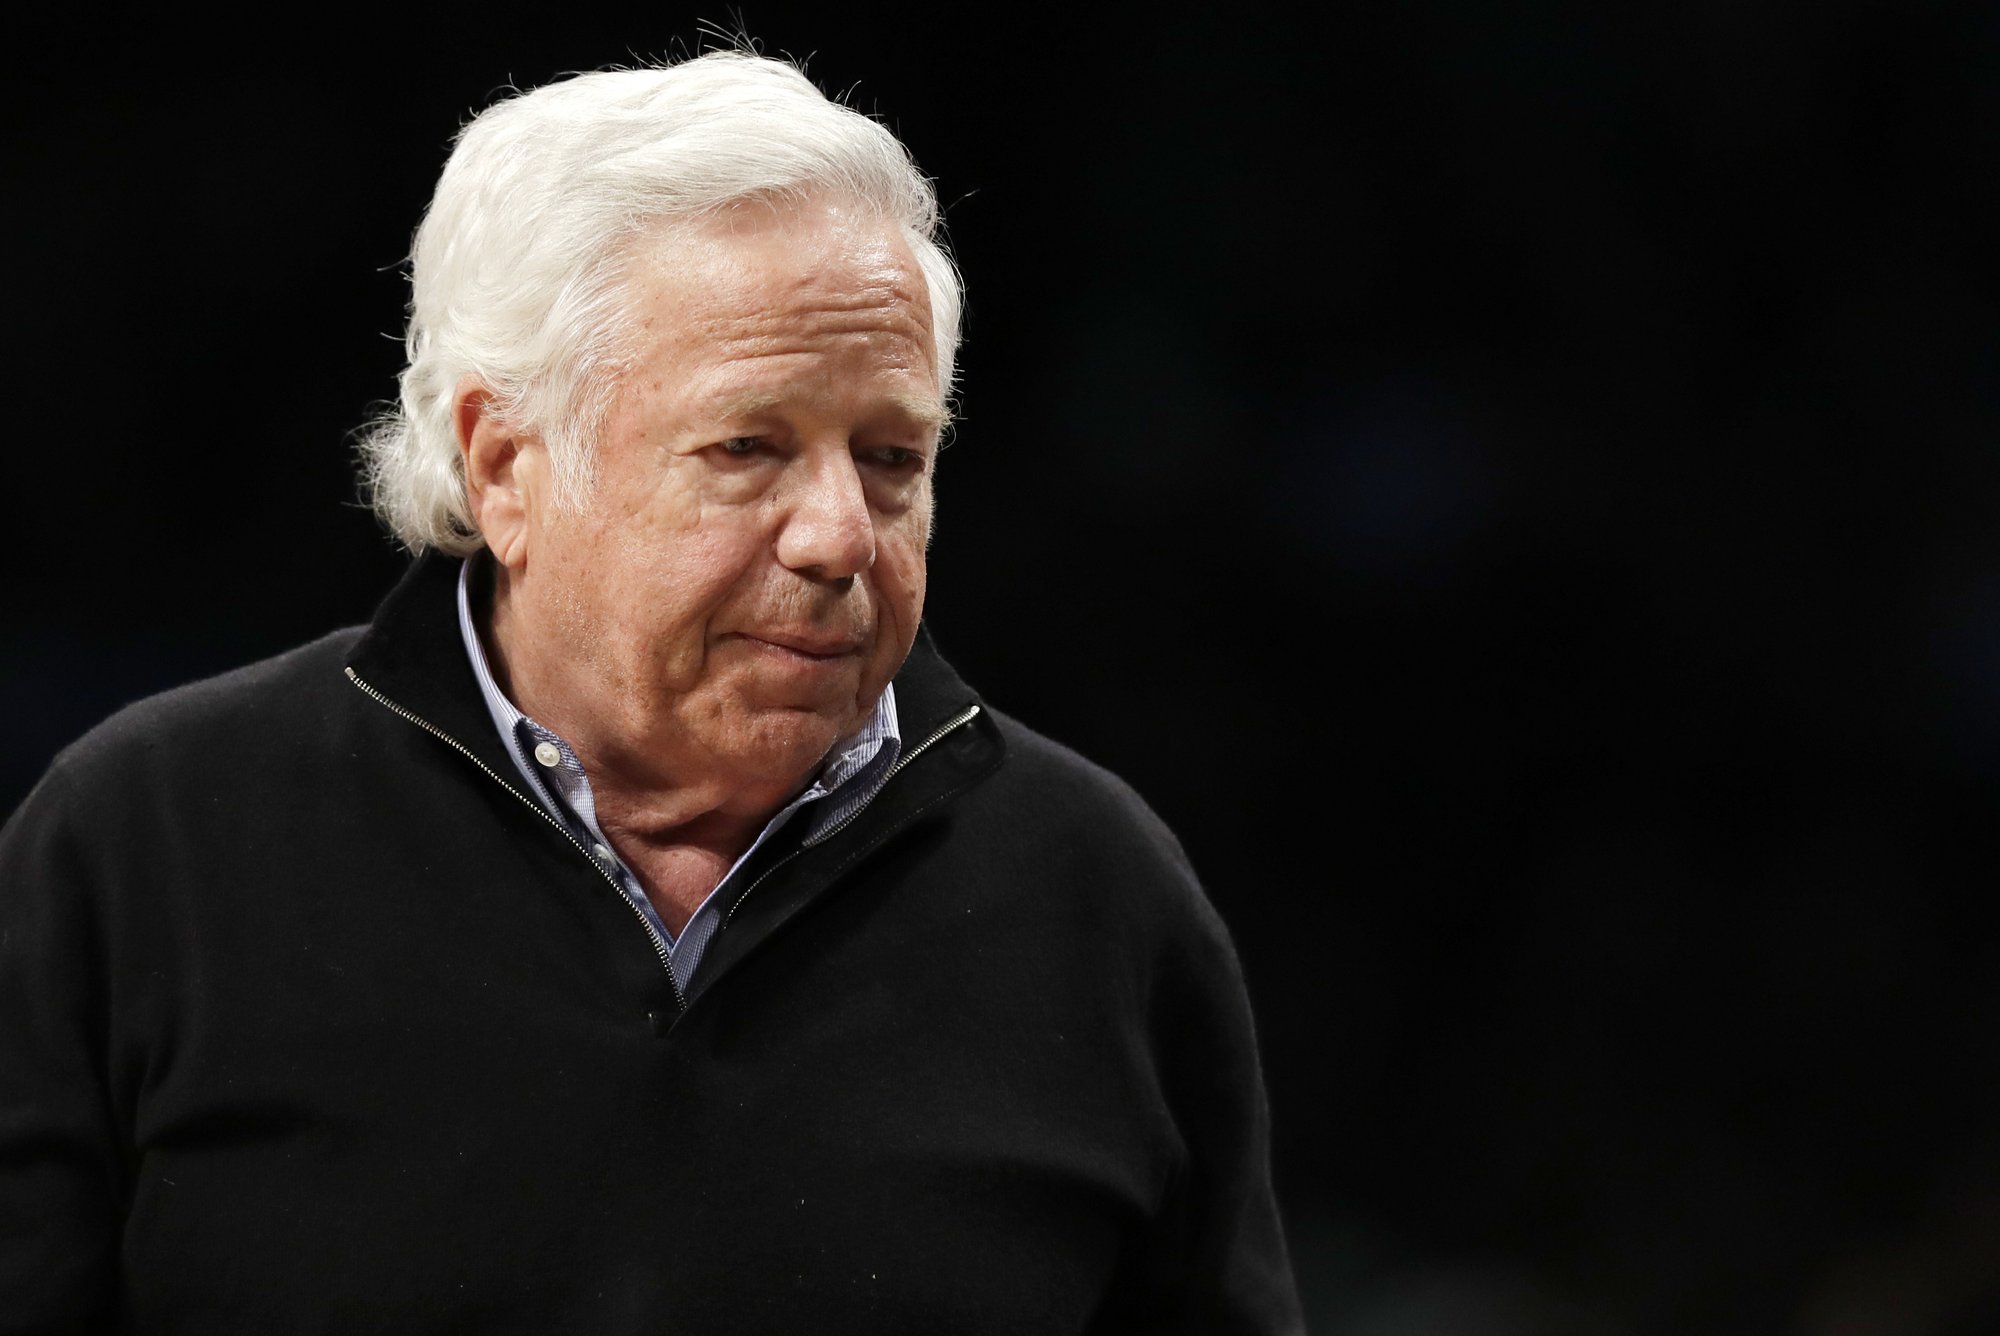 Judge Orders Kraft Massage Video Not Be Released For Now